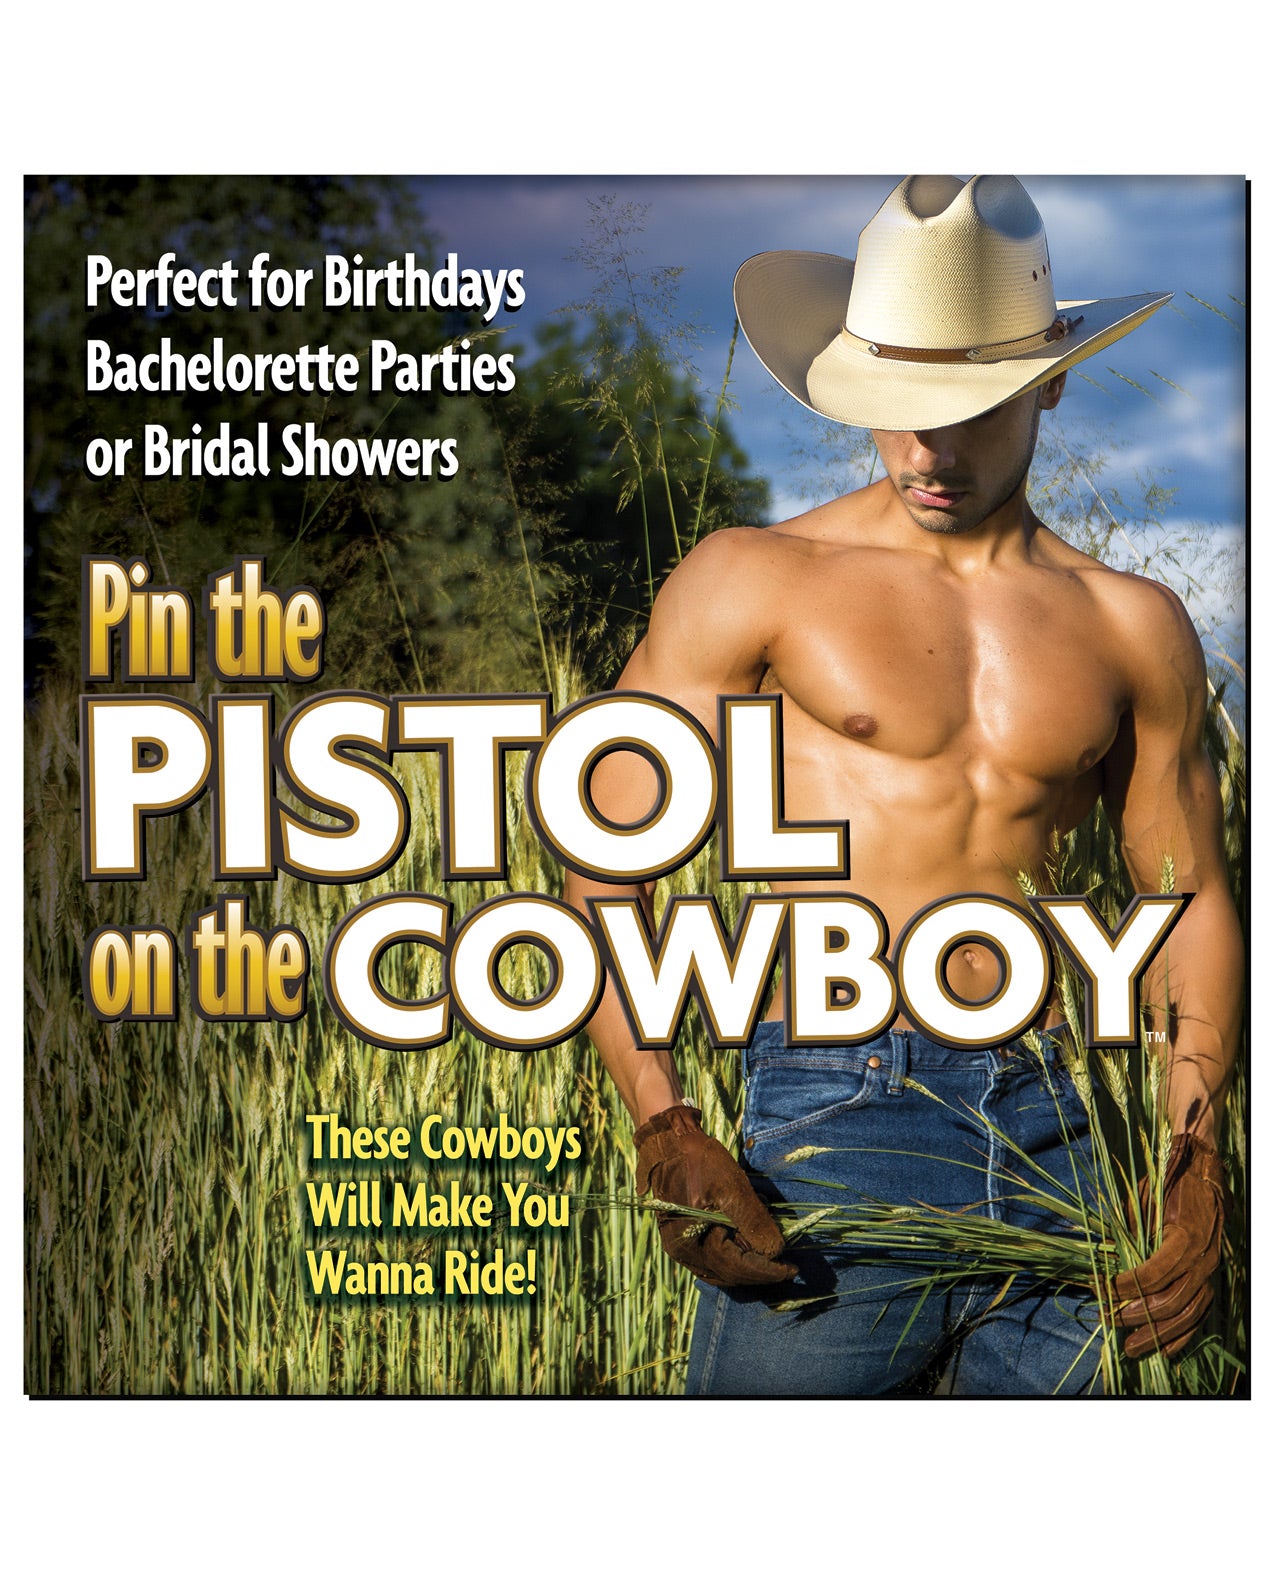 Pin The Pistol On The Cowboy - LUST Depot